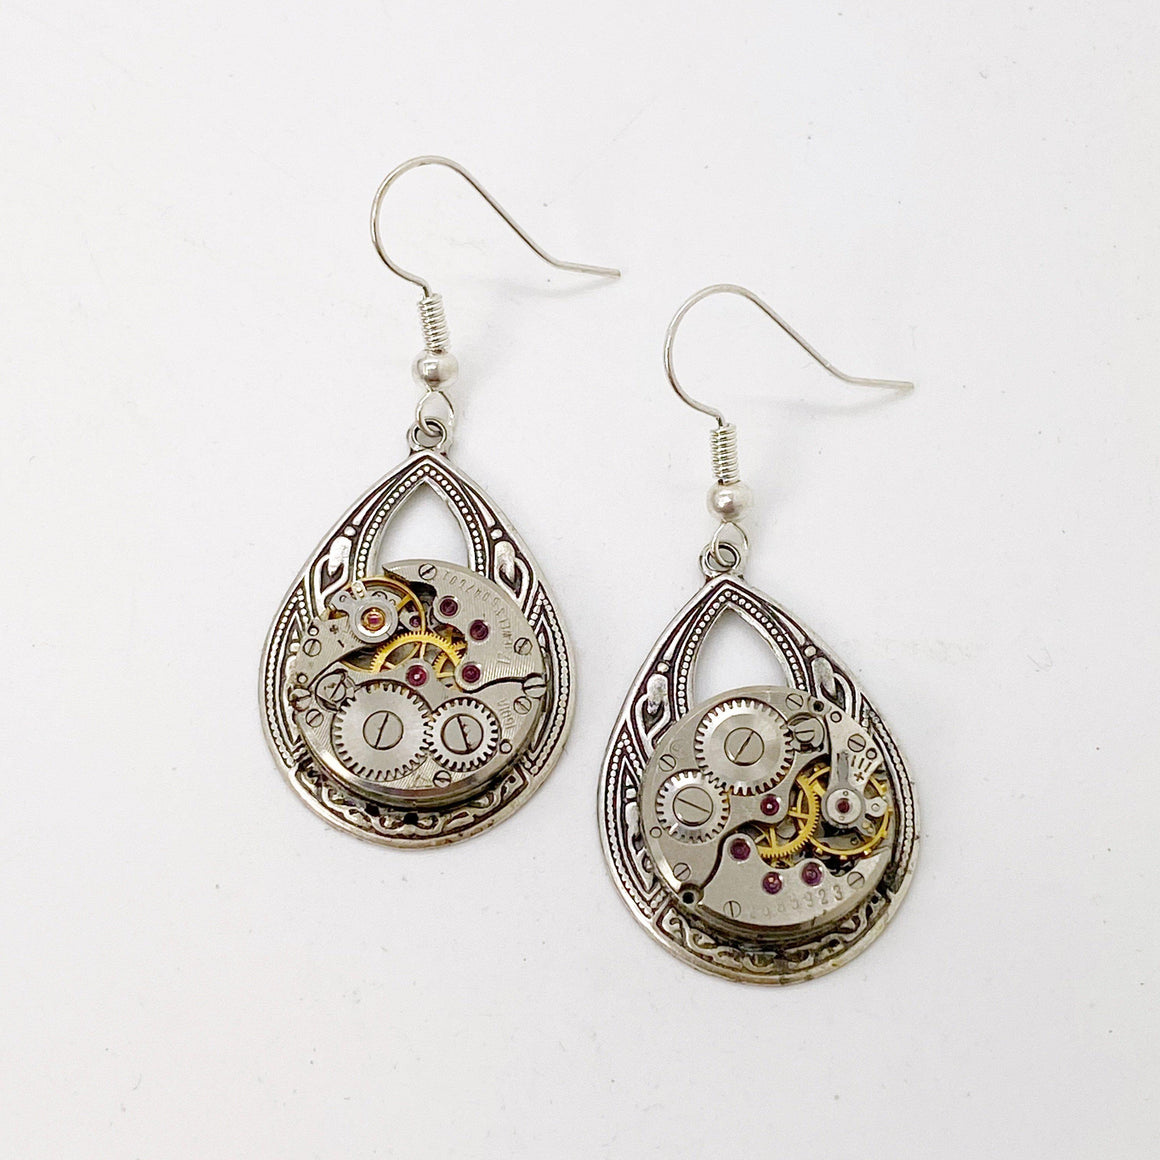 Helen, Small Dangle Earrings - The Victorian Magpie